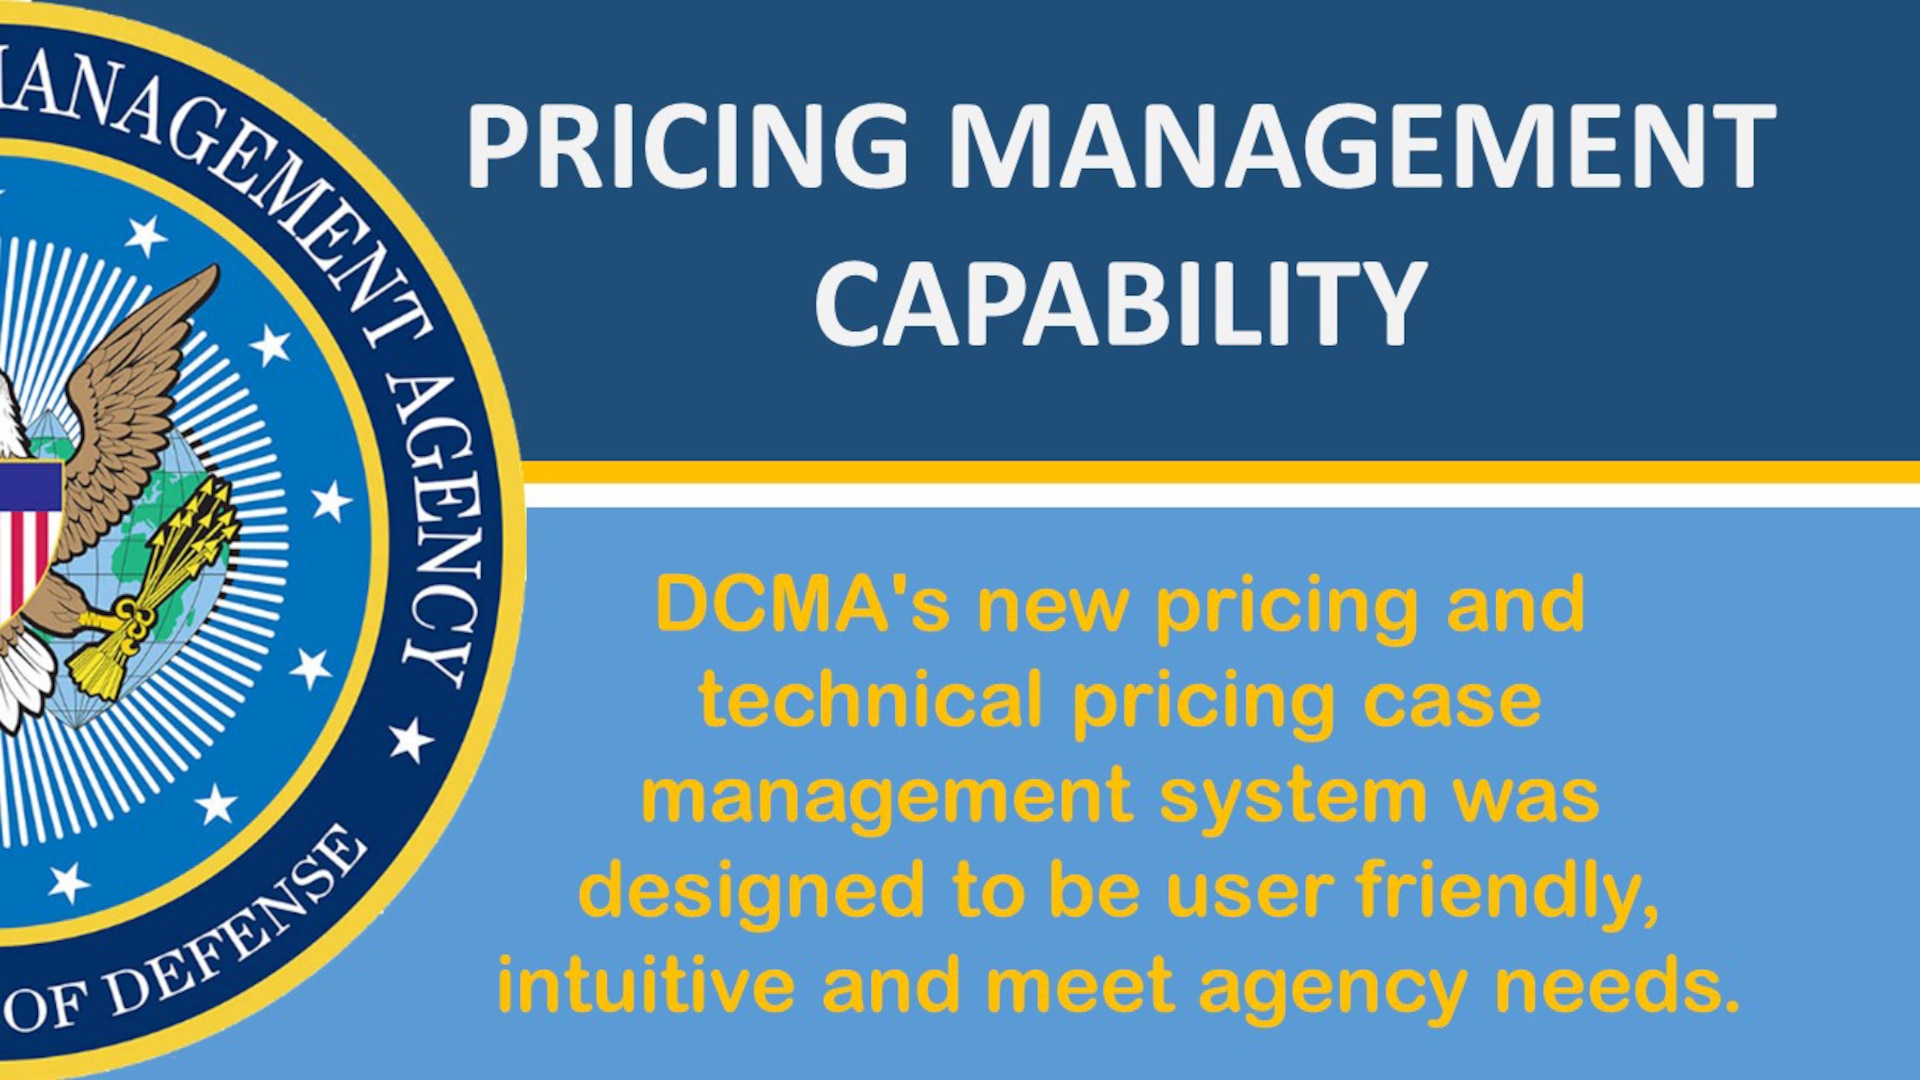 The Defense Contract Management Agency has launched two new modules that promise to make pricing and technical pricing more user friendly, intuitive and organized.